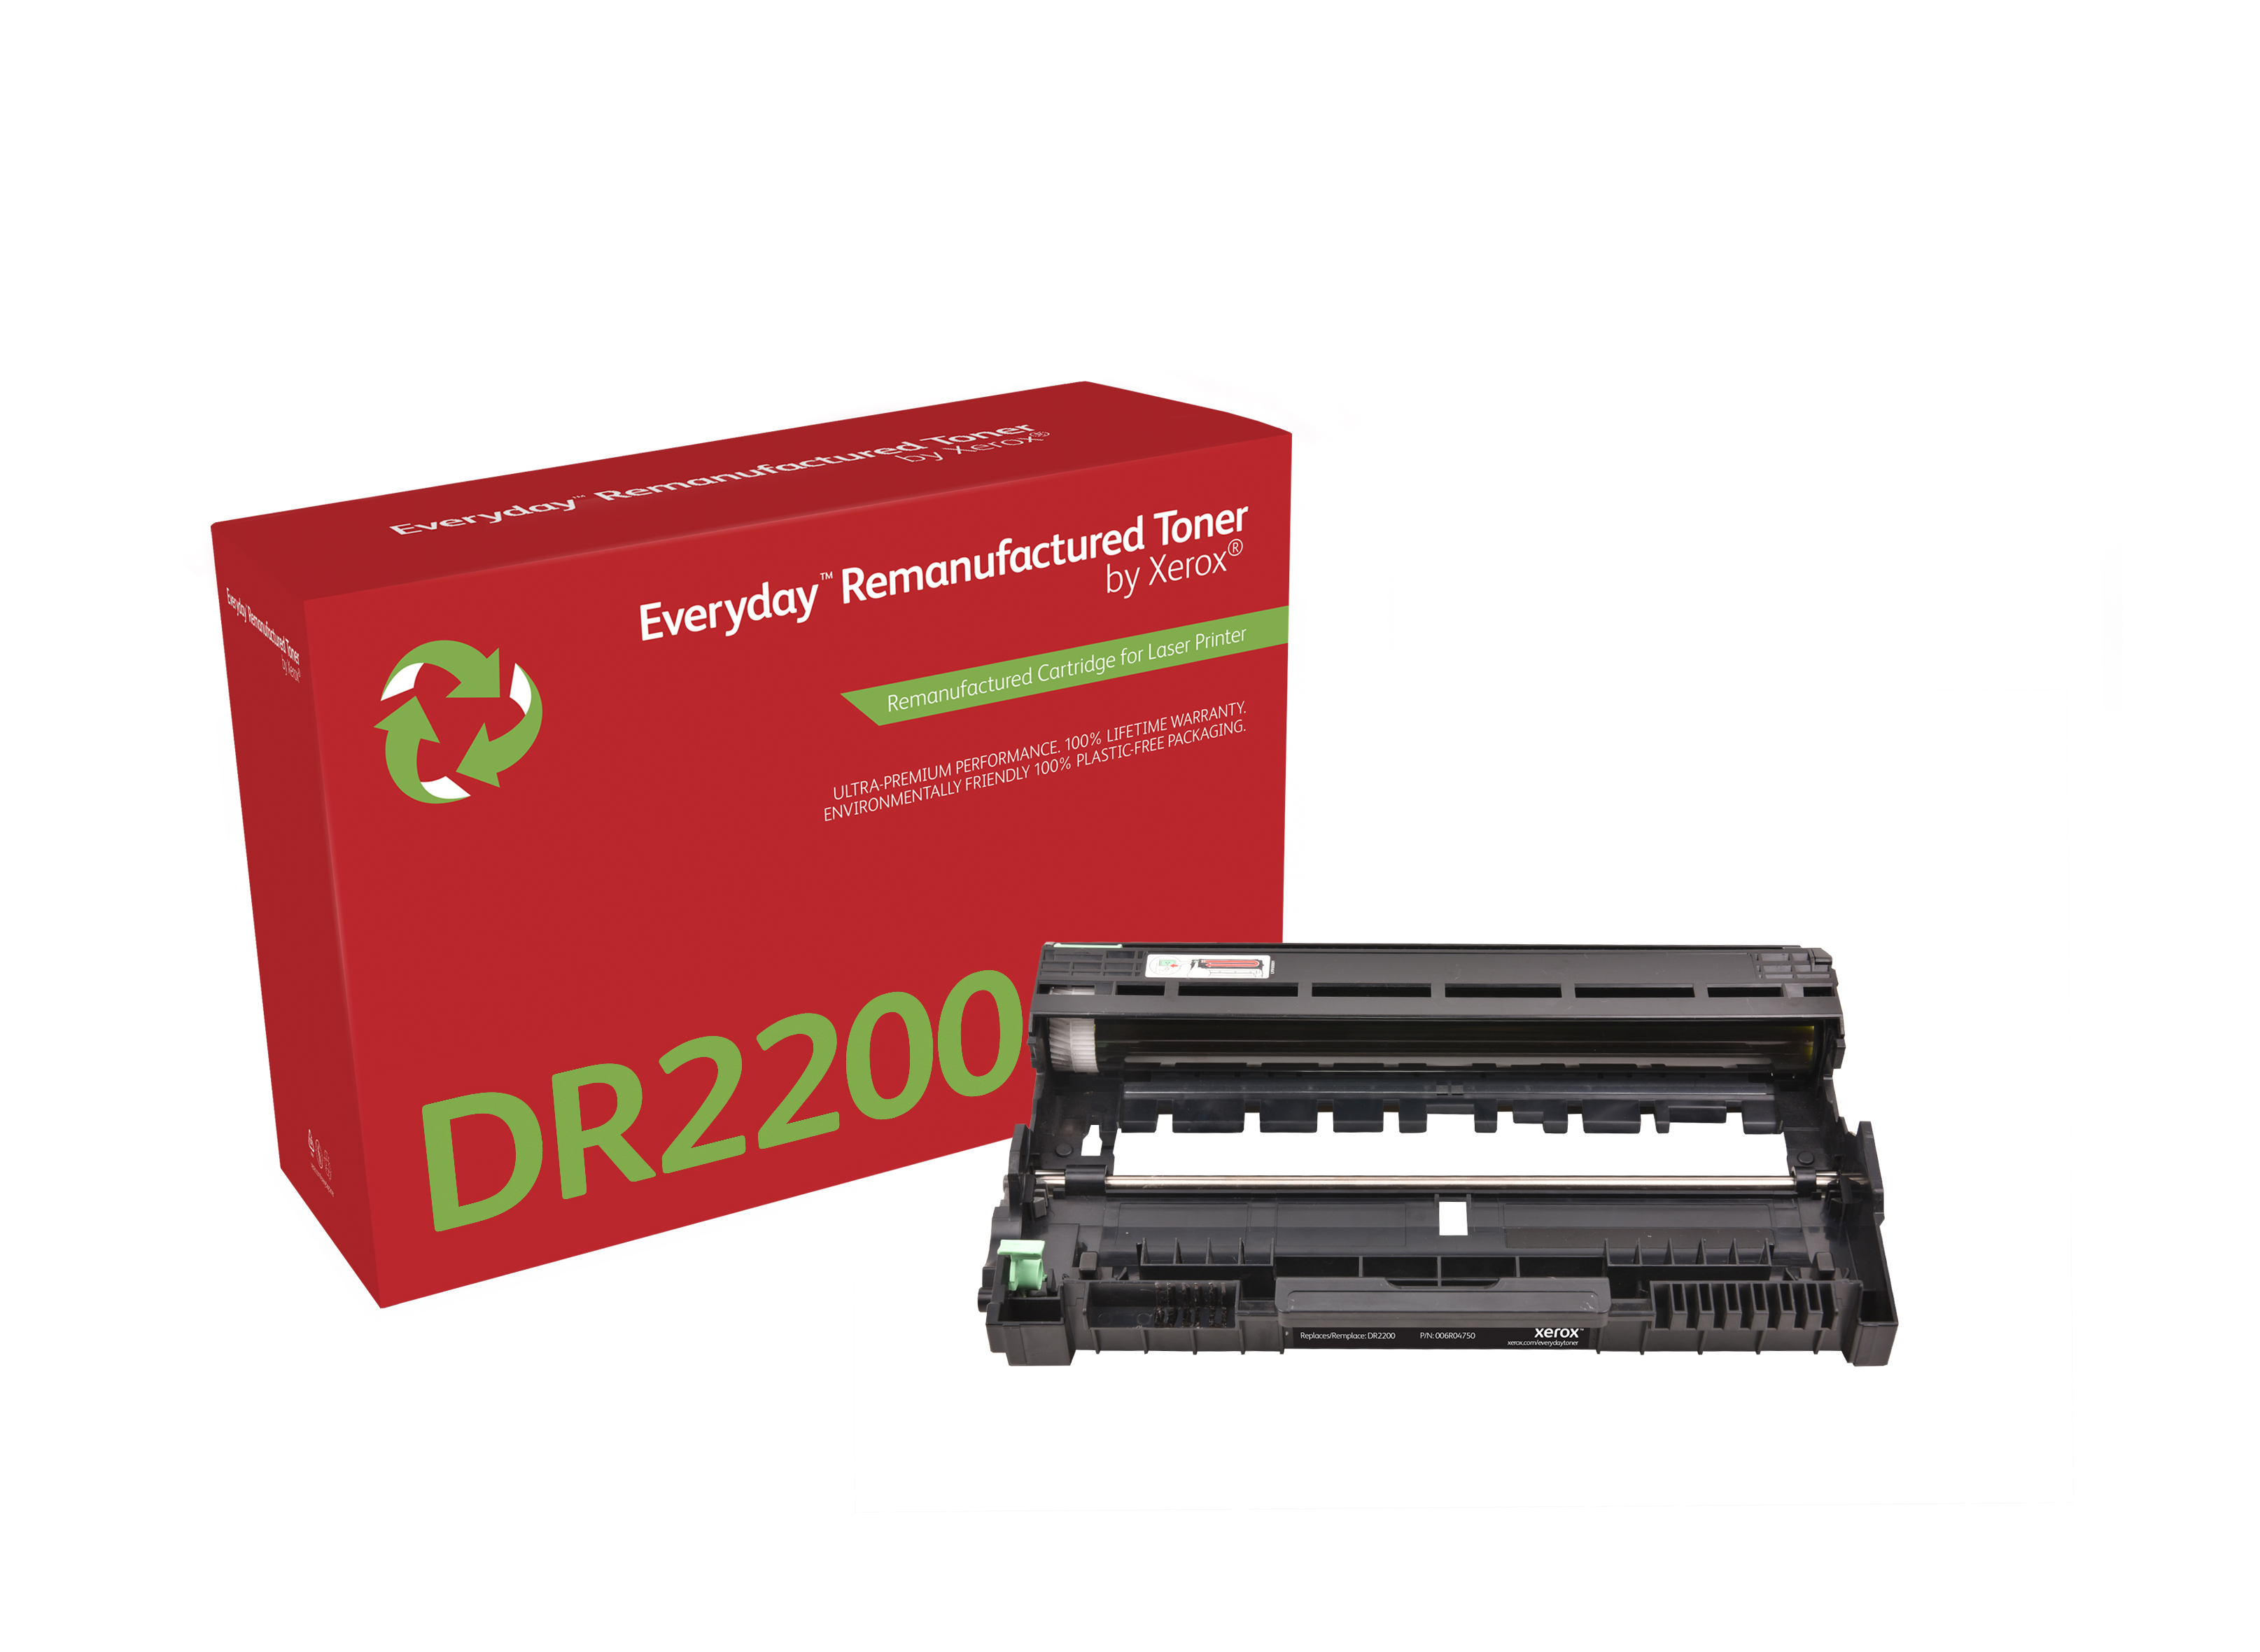 Everyday Black Toner compatible with Brother DR-2200, Standard Yield  006R04750 by Xerox